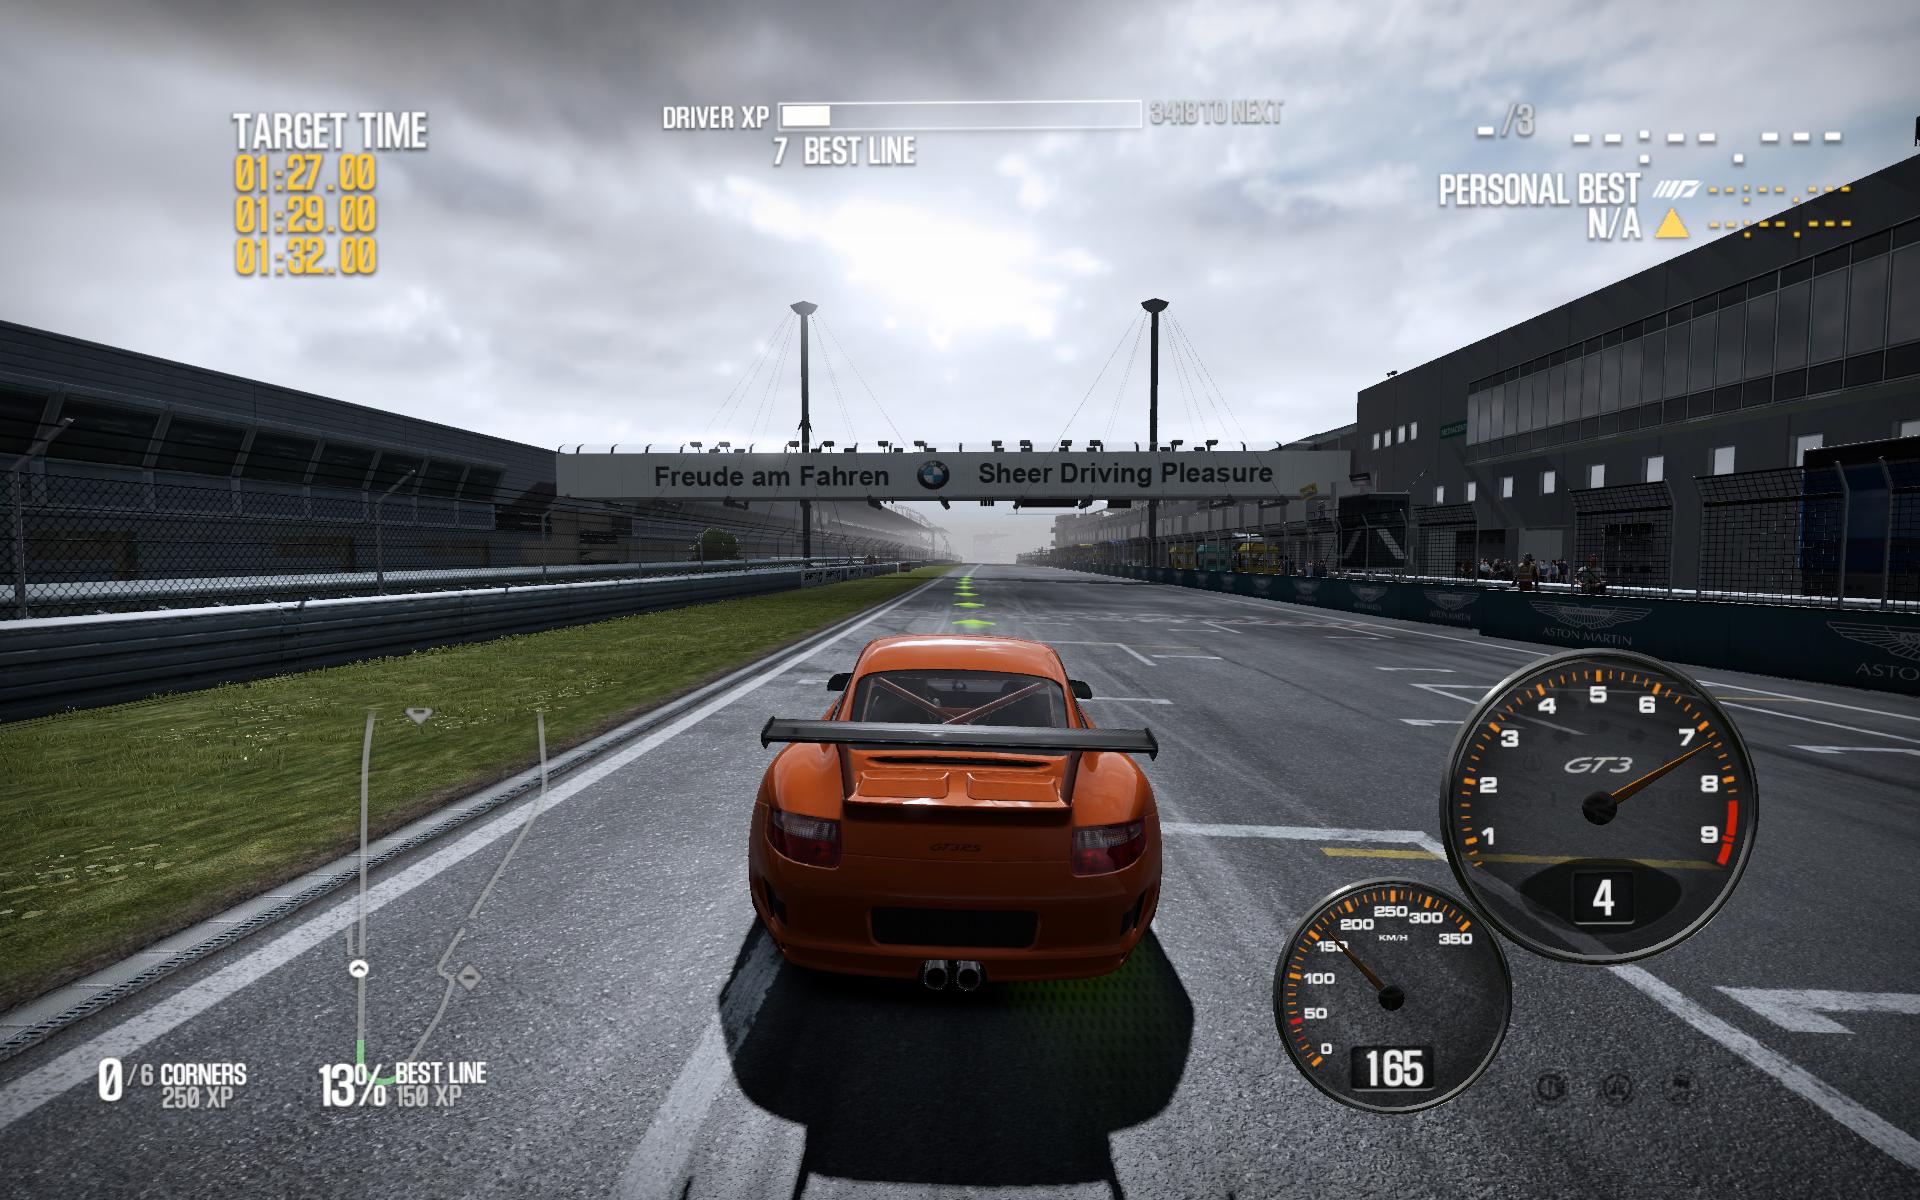 download free need for speed shift unleashed